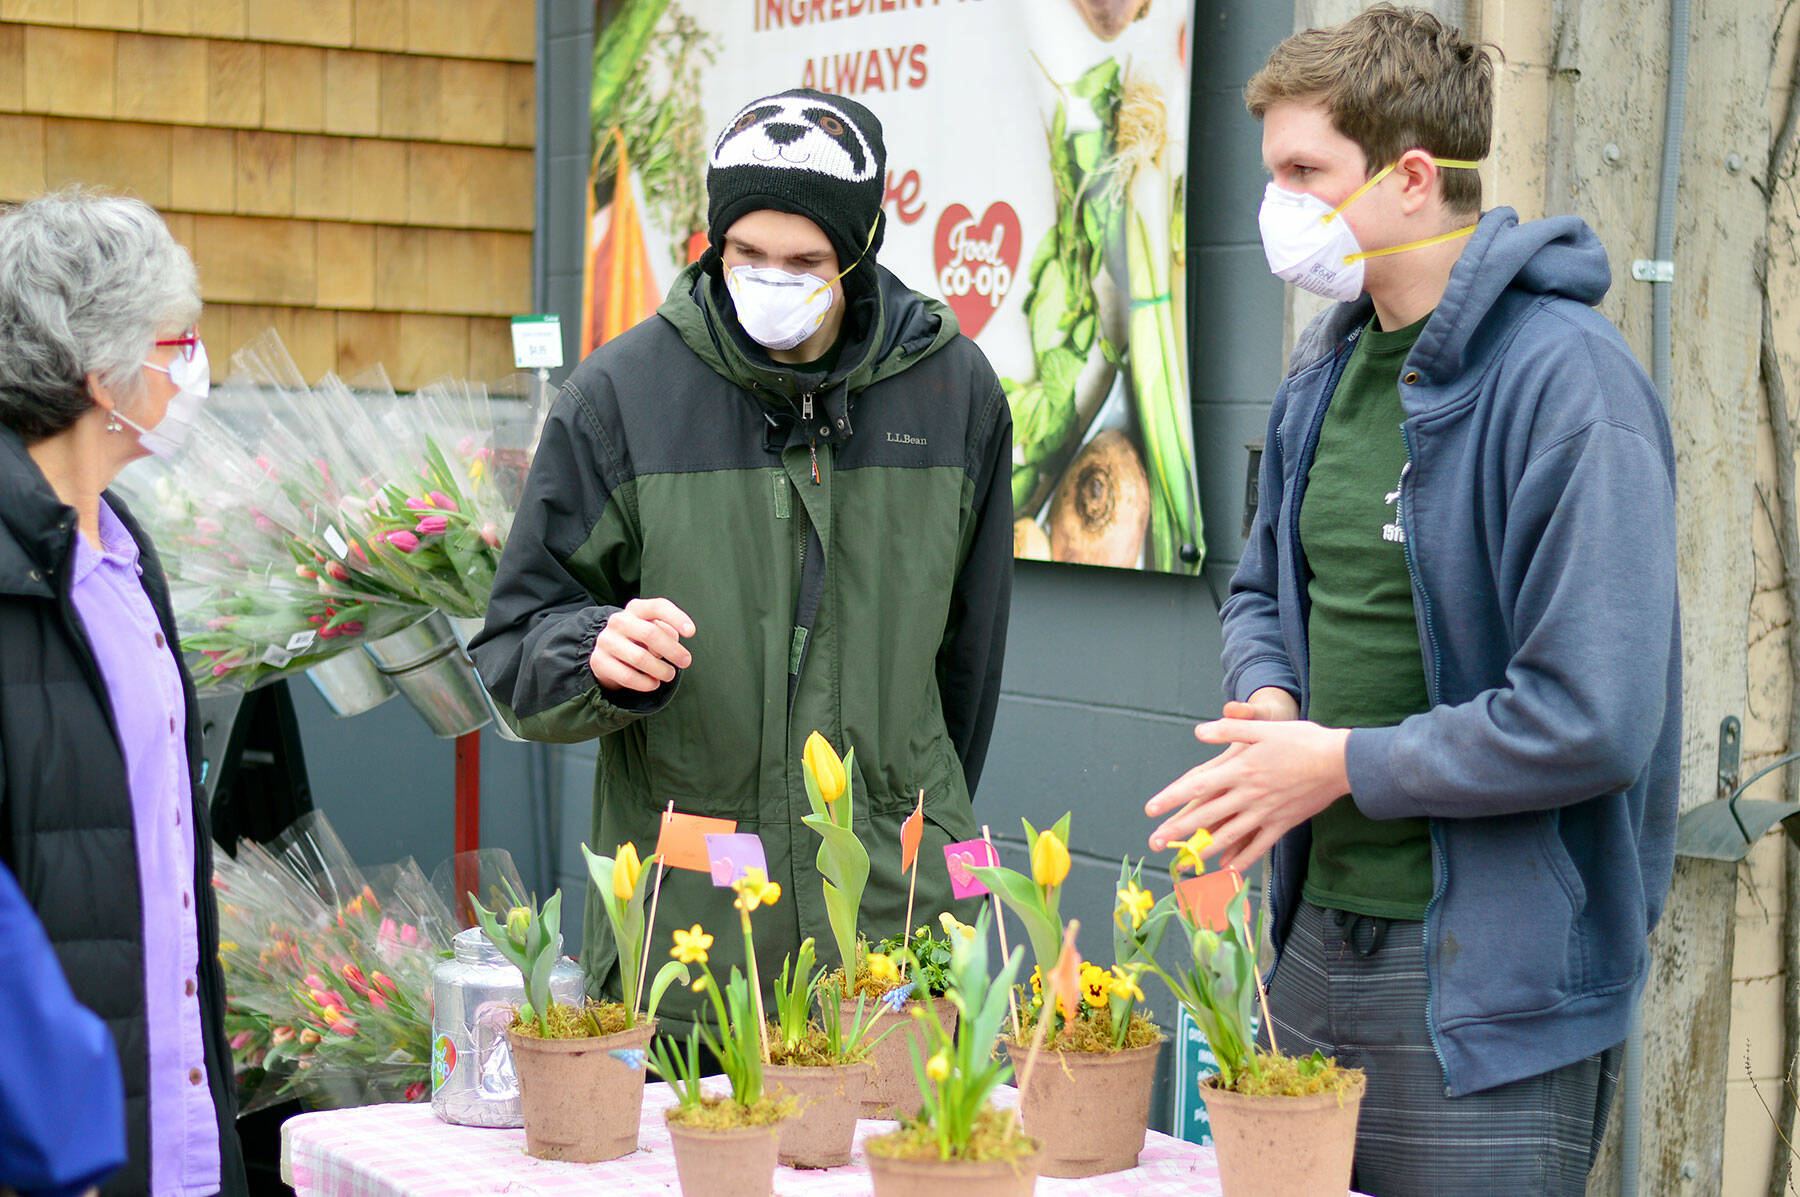 Port Townsend STEM Club members Everest Ashford, 16, left, and Nathaniel Ashford, 17, set up their Valentine’s Day flower fundraiser, along with one of the club’s miniature greenhouses, outside the Food Co-op on Thursday. The fundraising table and flowers will reappear at the Co-op entrance today, Saturday and Monday. (Diane Urbani de la Paz/Peninsula Daily News)